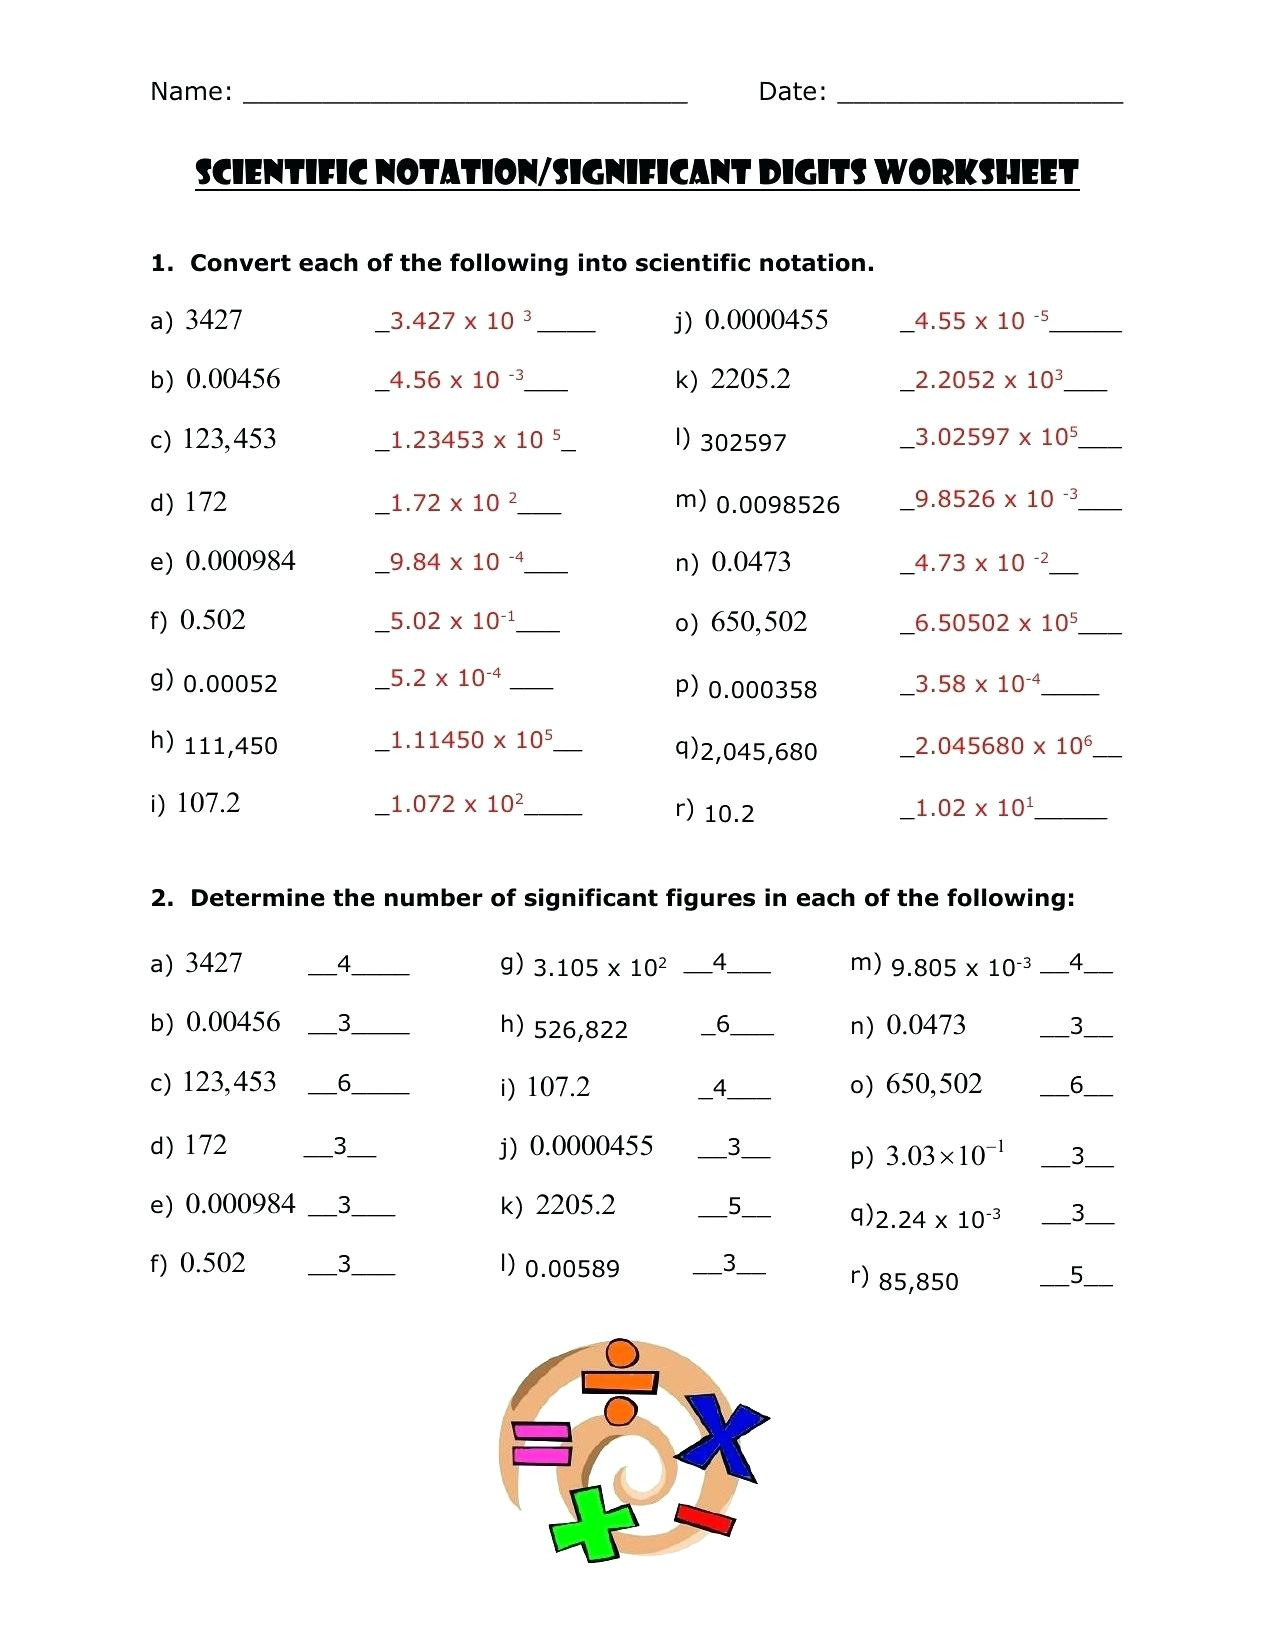 Scientific Notation Worksheet With Answers